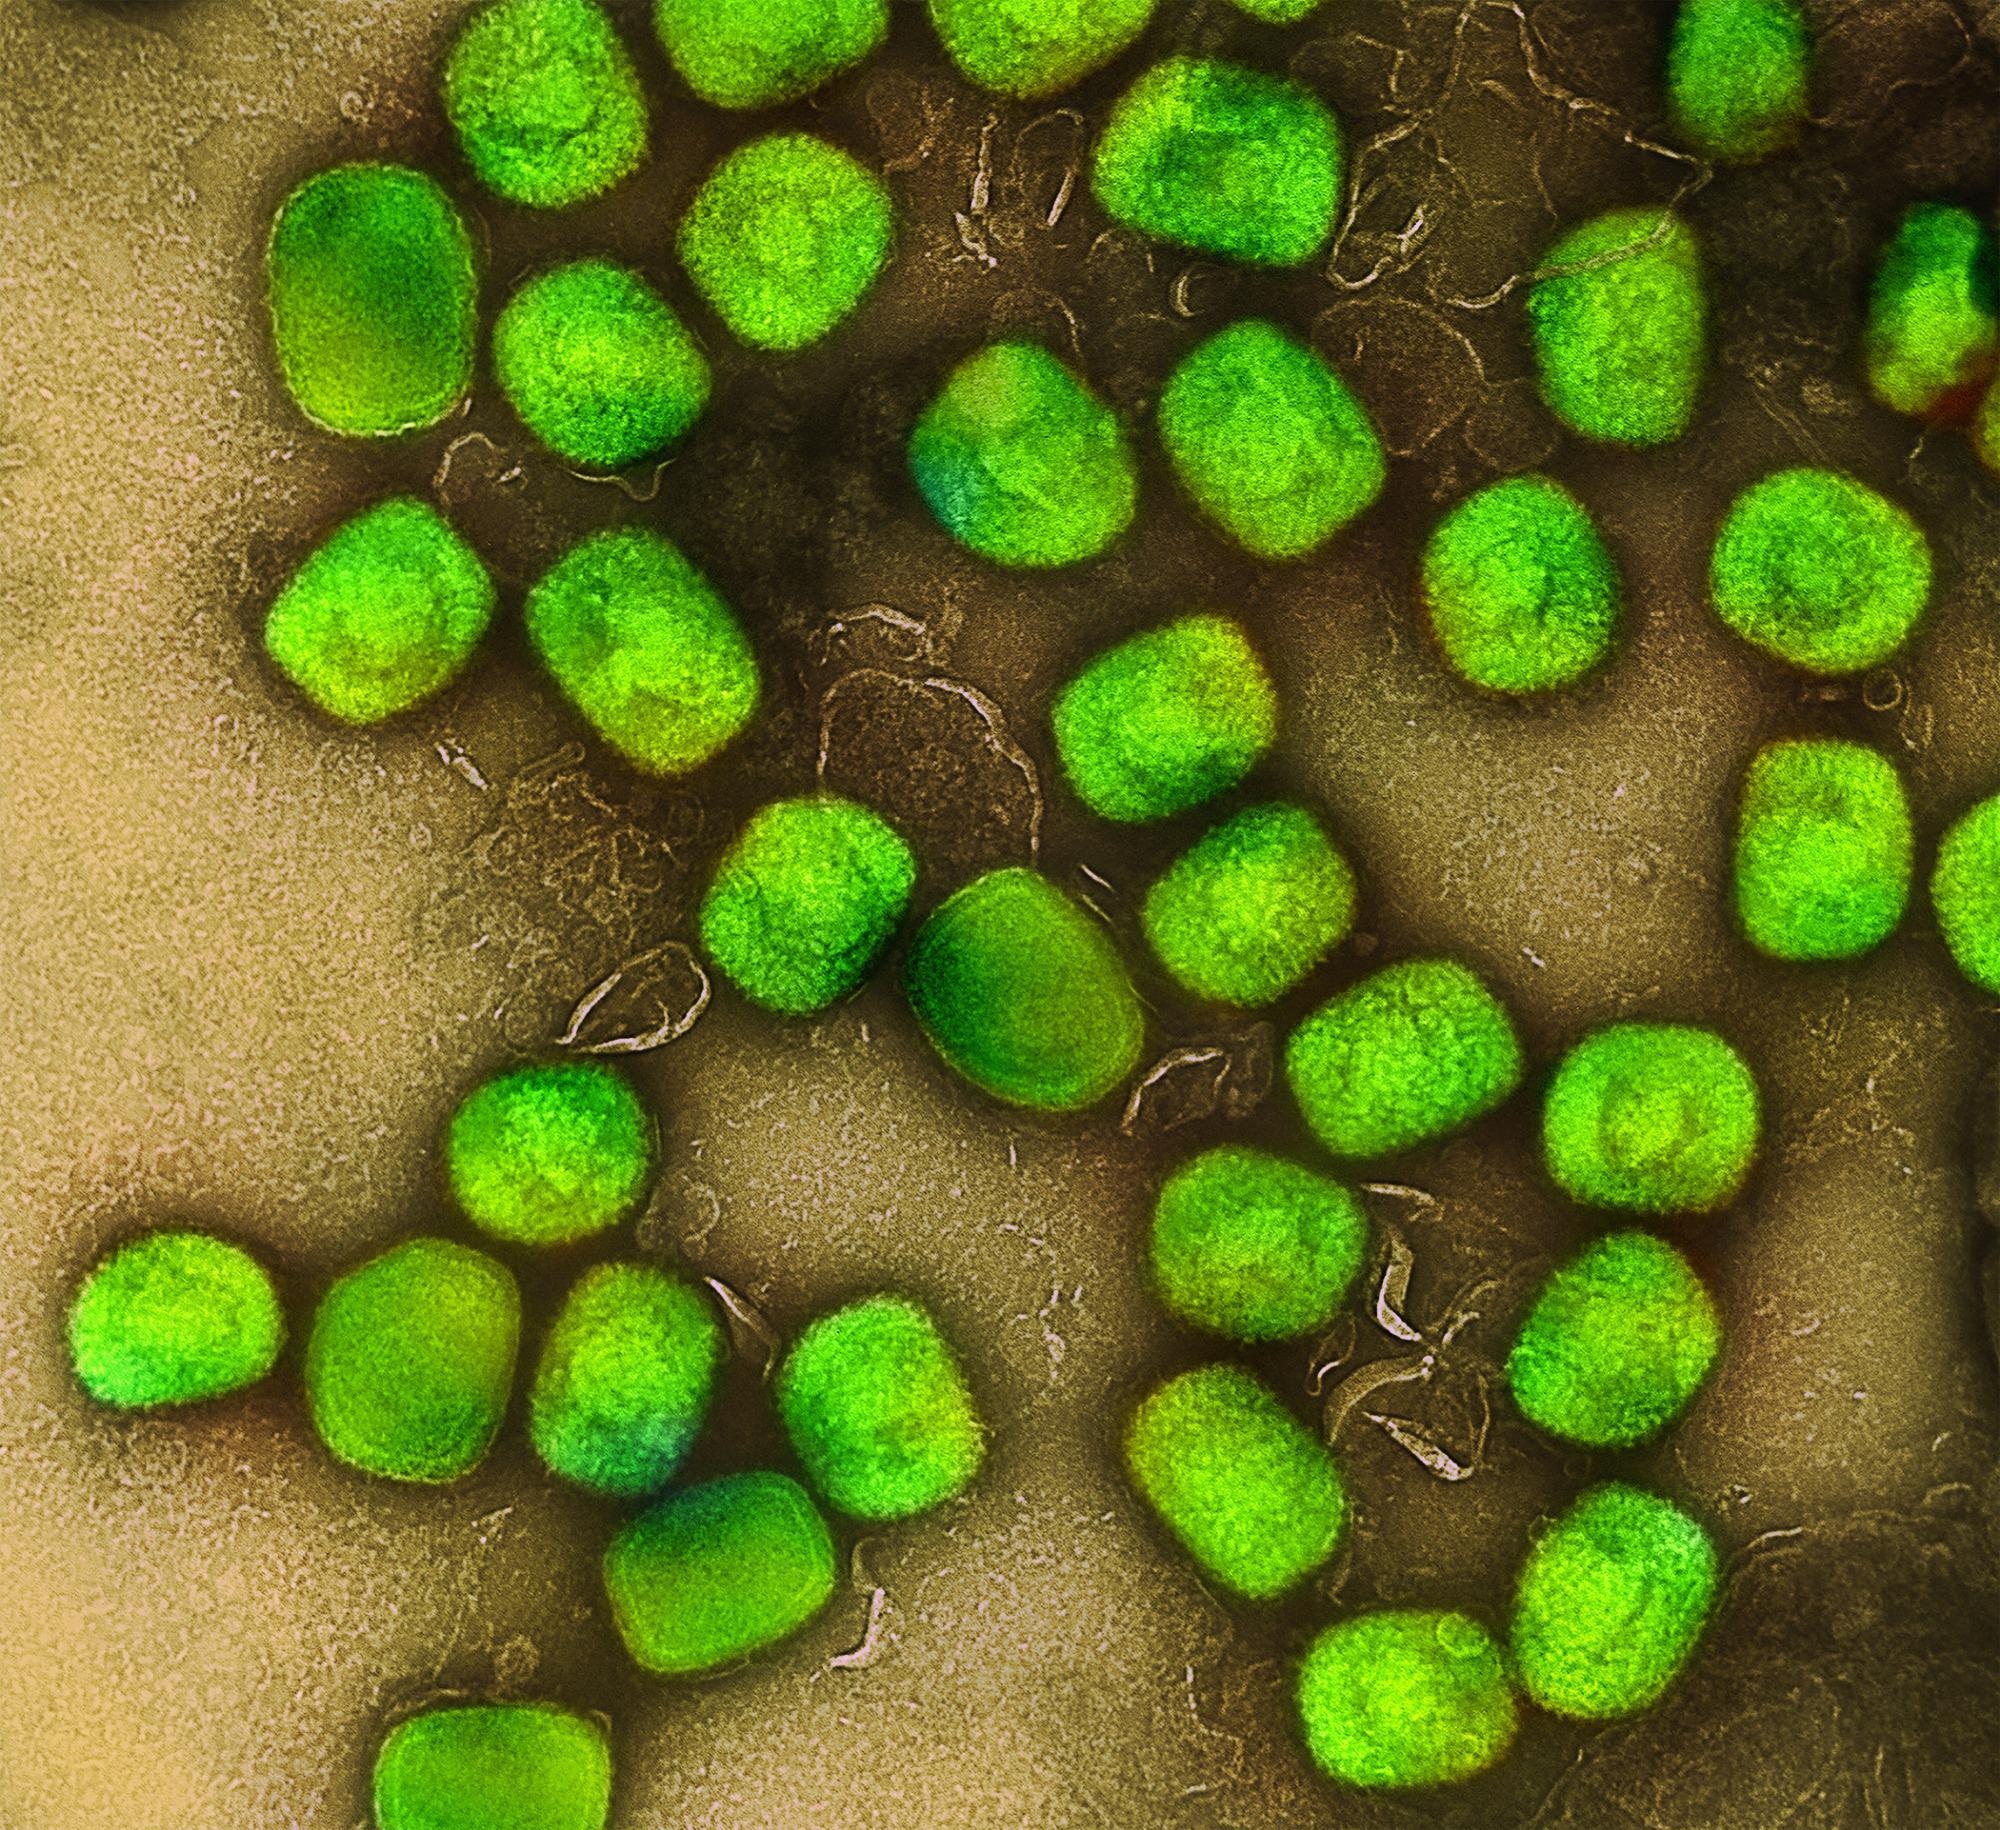 Colorized transmission electron micrograph of monkeypox virus particles (green) cultivated and purified from cell culture. Image captured at the NIAID Integrated Research Facility (IRF) in Fort Detrick, Maryland. Credit: NIAID